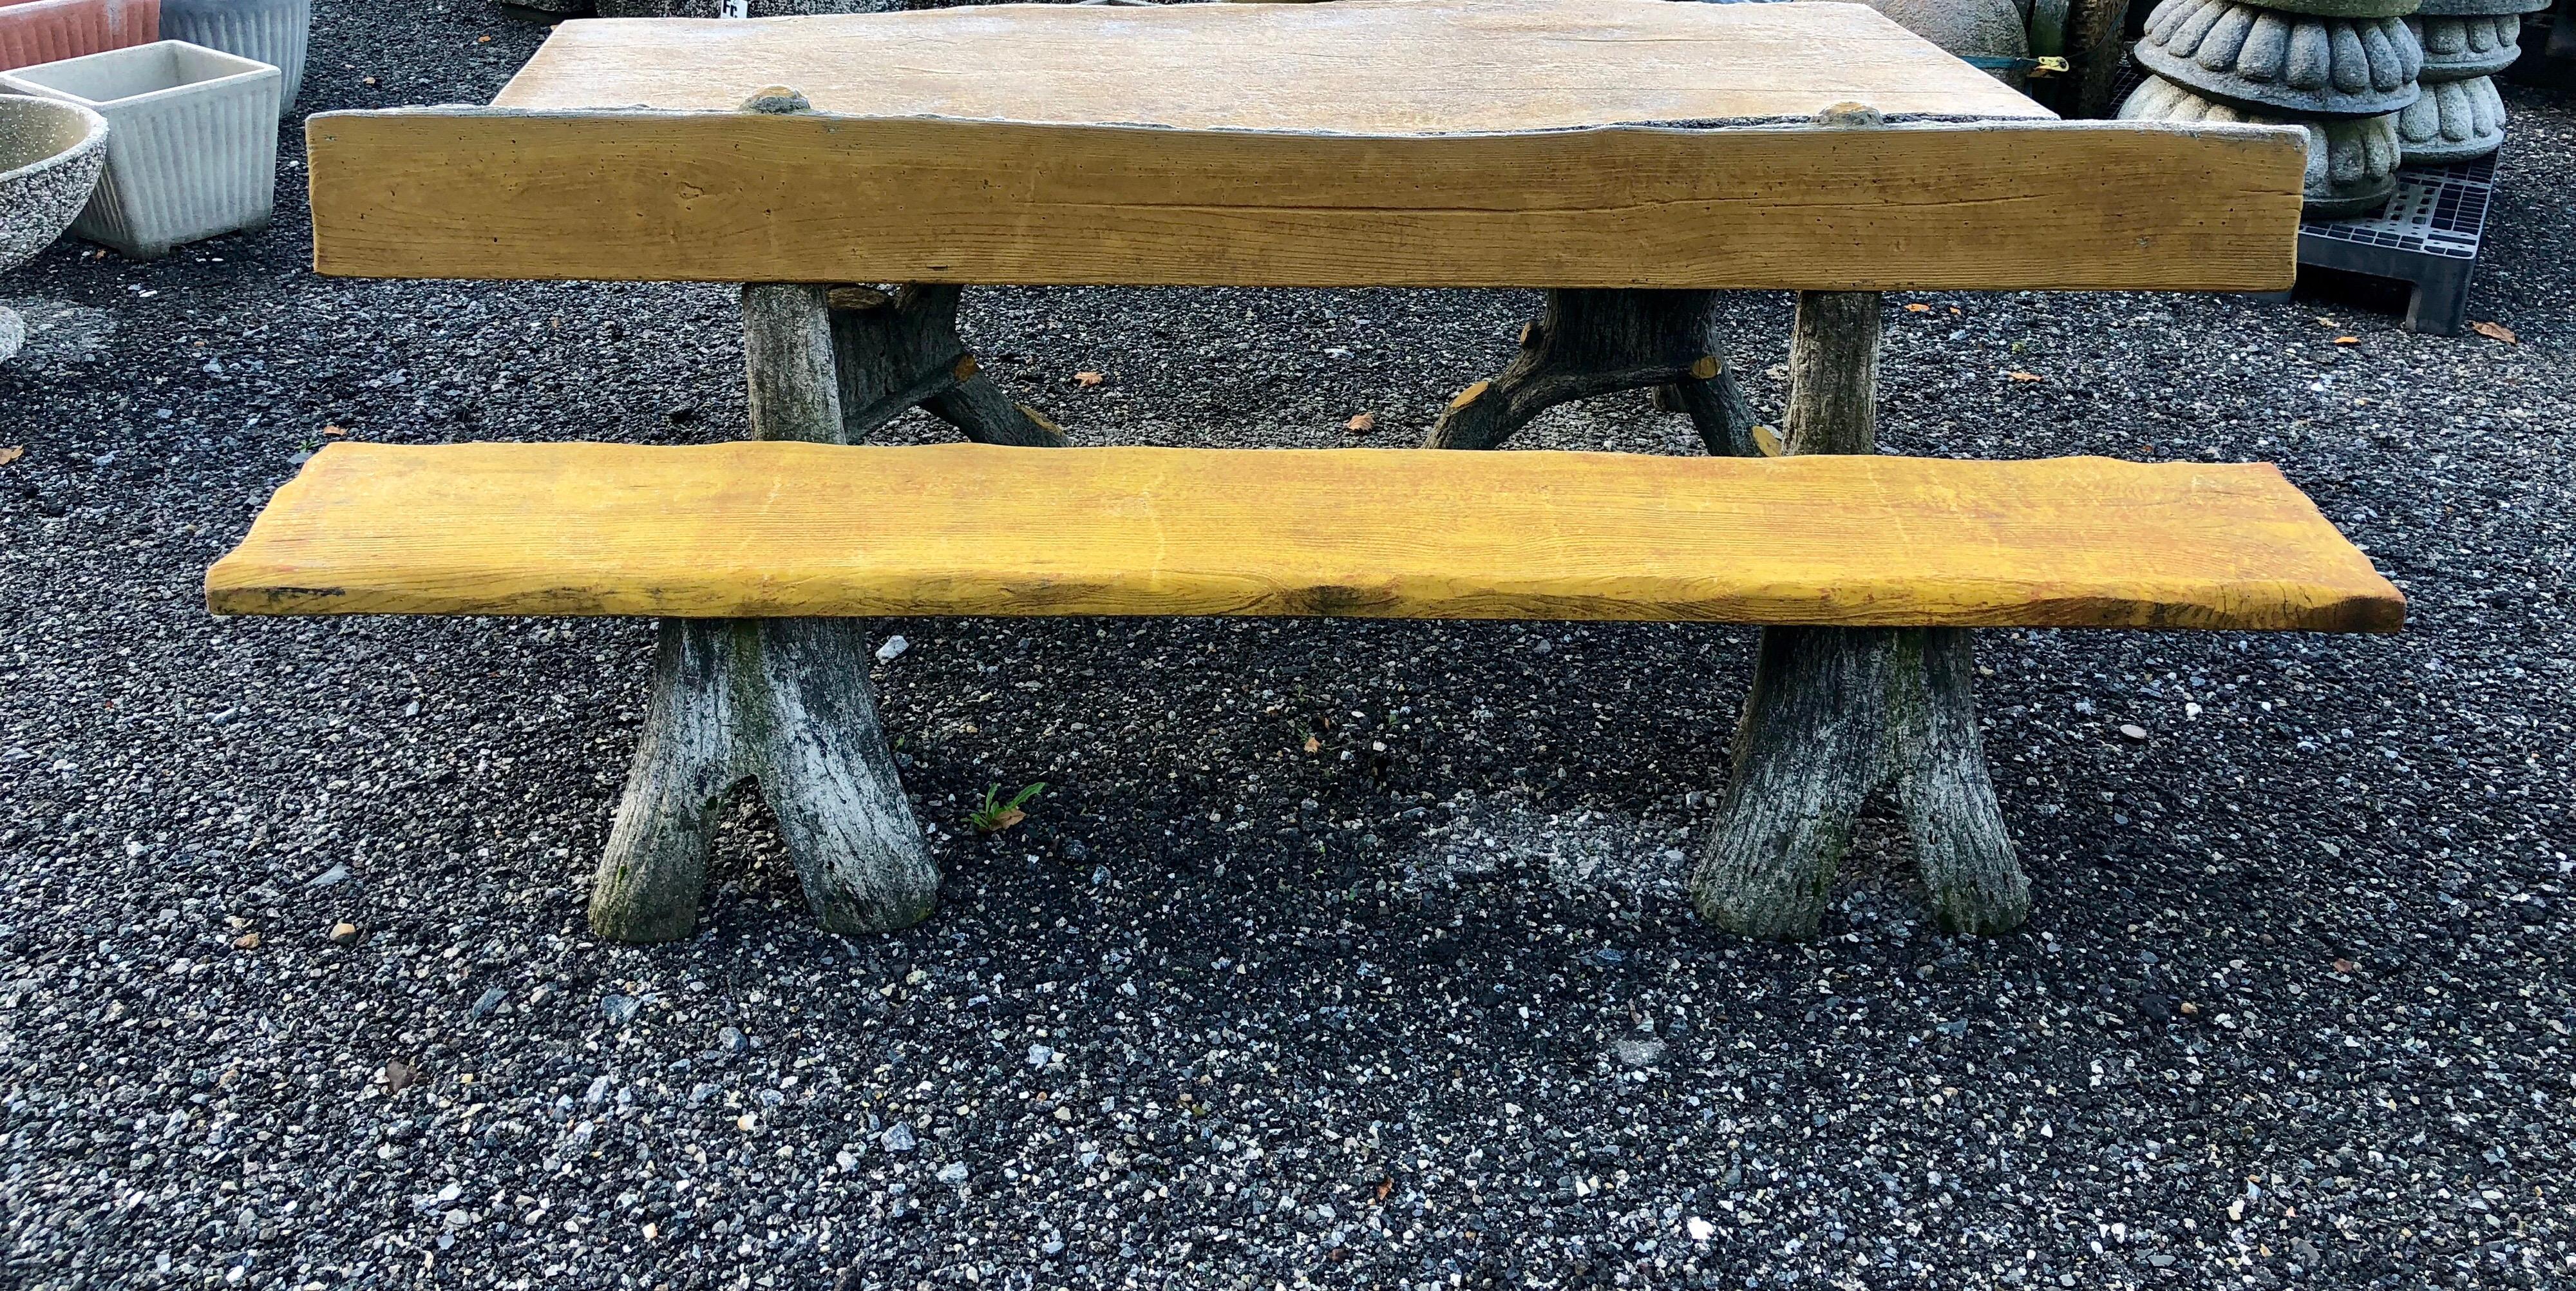 Garden bench made of molded and painted concrete that look like a tree. Made in France in the 20-th century. 

There is also a table available.
For the table and the bench the price is special: Euro 7000
The bench is yellow painted, wide